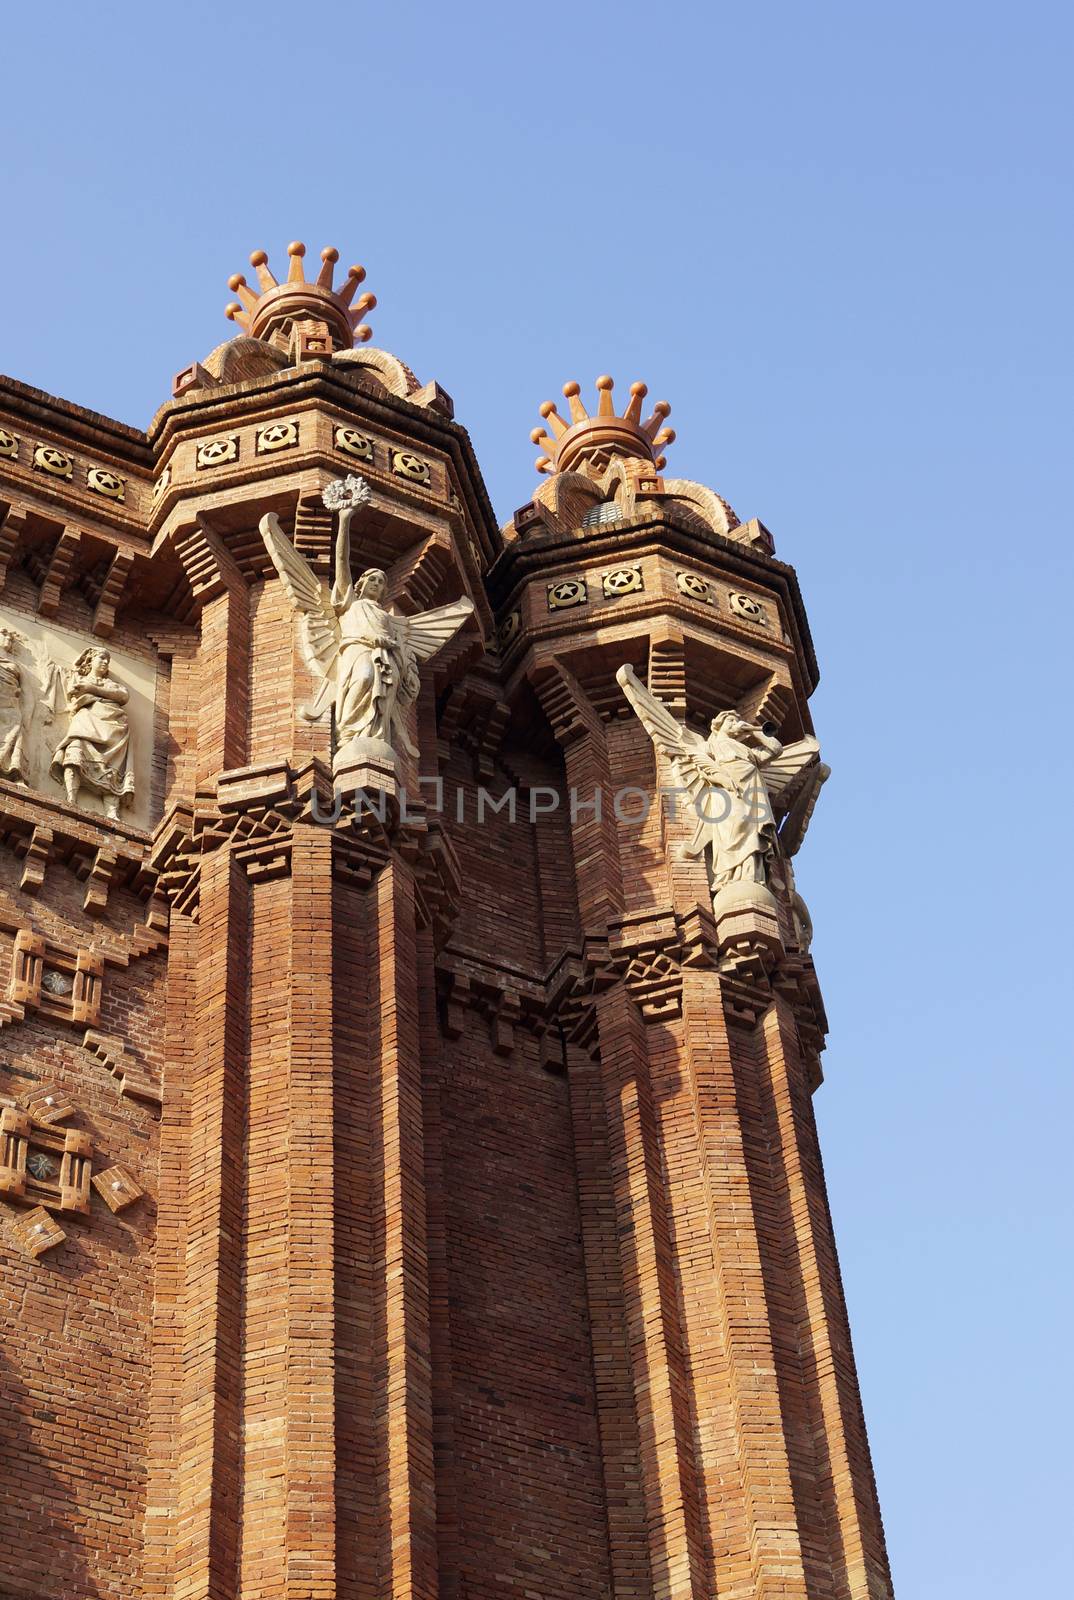 Details of the Arc de Triomf by magraphics